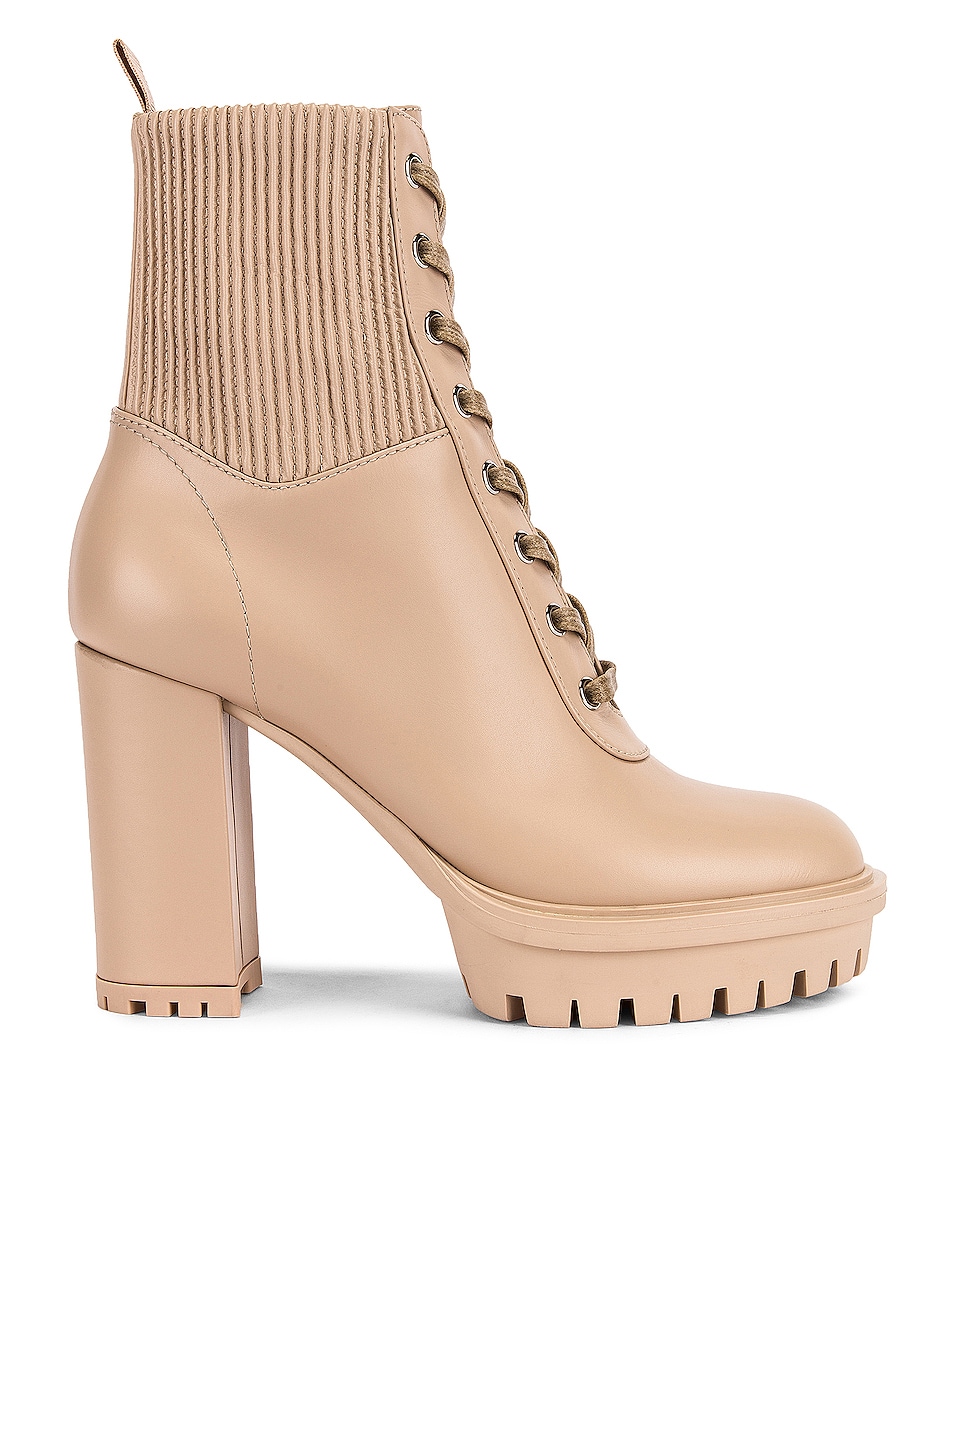 Image 1 of Gianvito Rossi Martis Lace Up Boots in Mousse